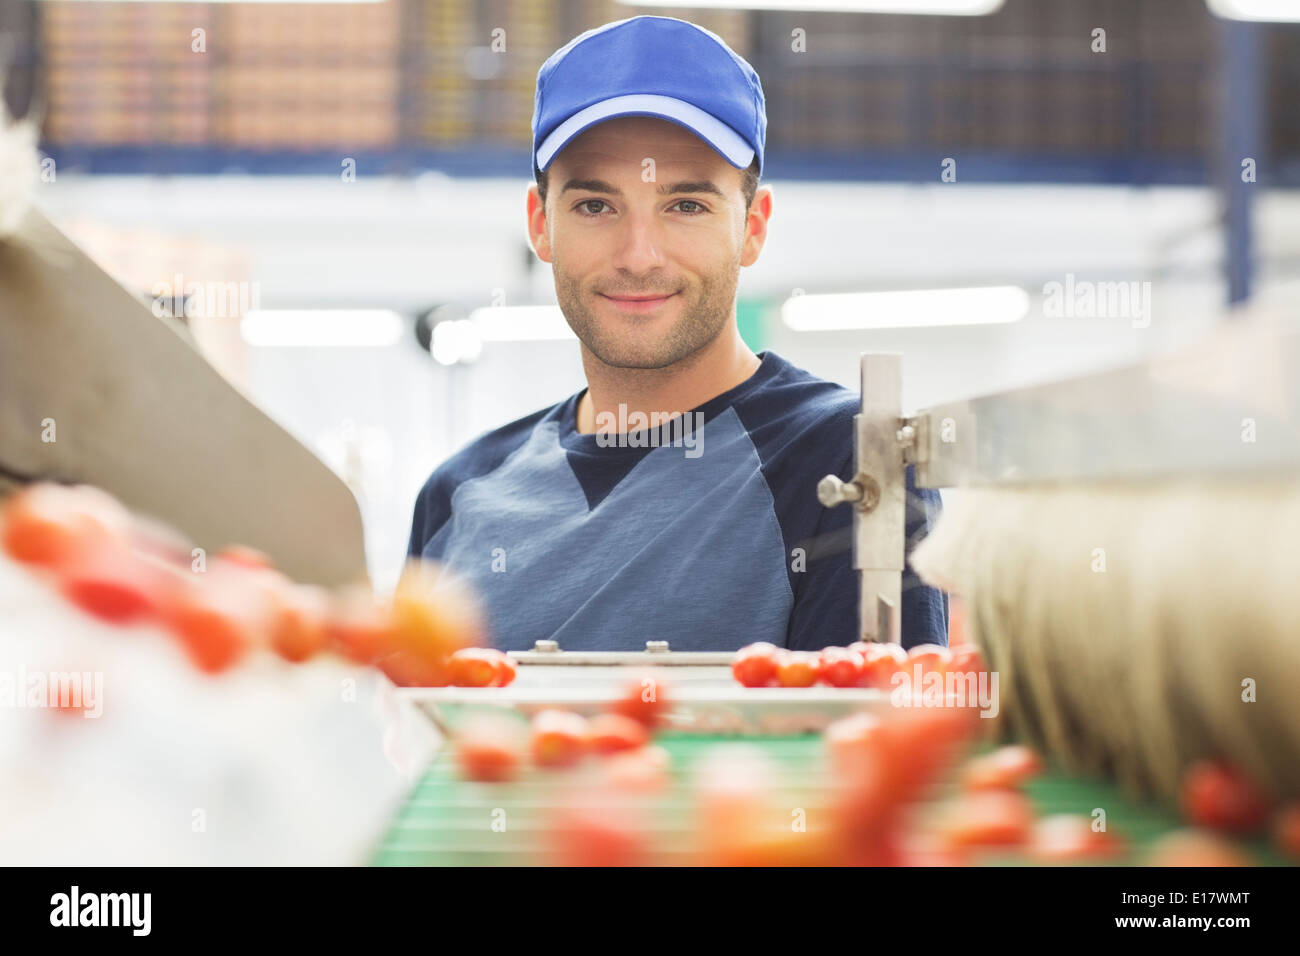 Portrait of worker at conveyor belt in food processing plant Stock Photo